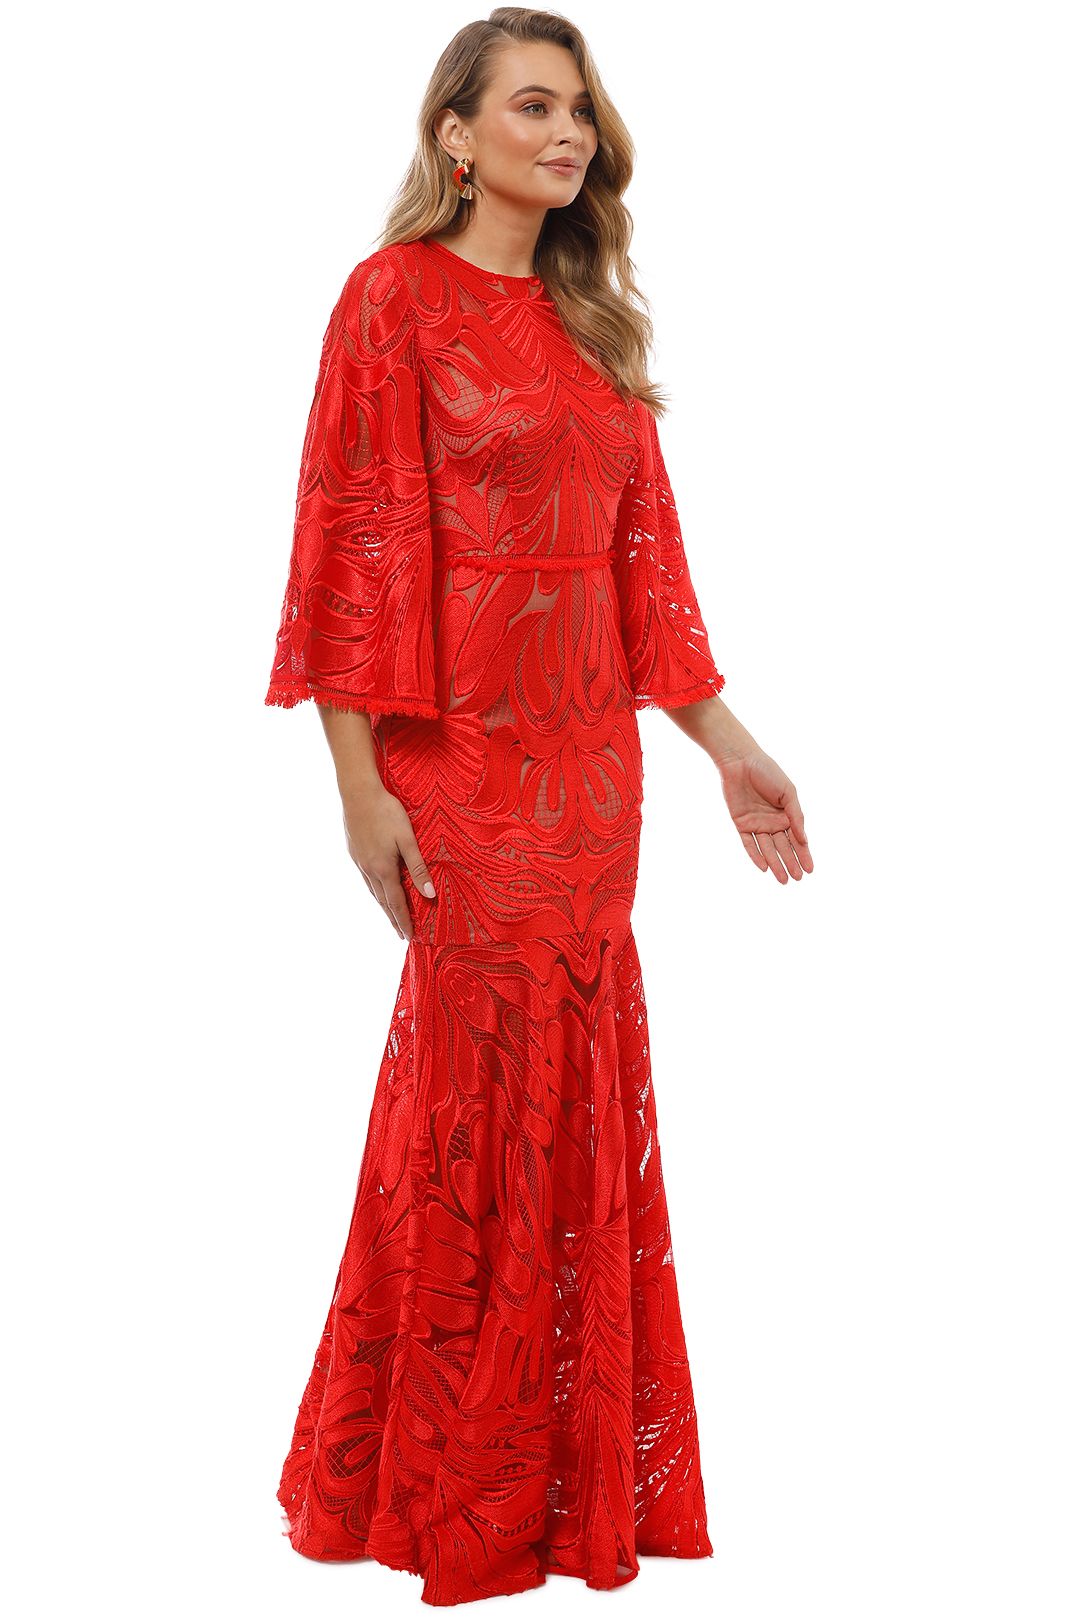 Talulah - Carnation Flared Sleeve Gown - Red - Side